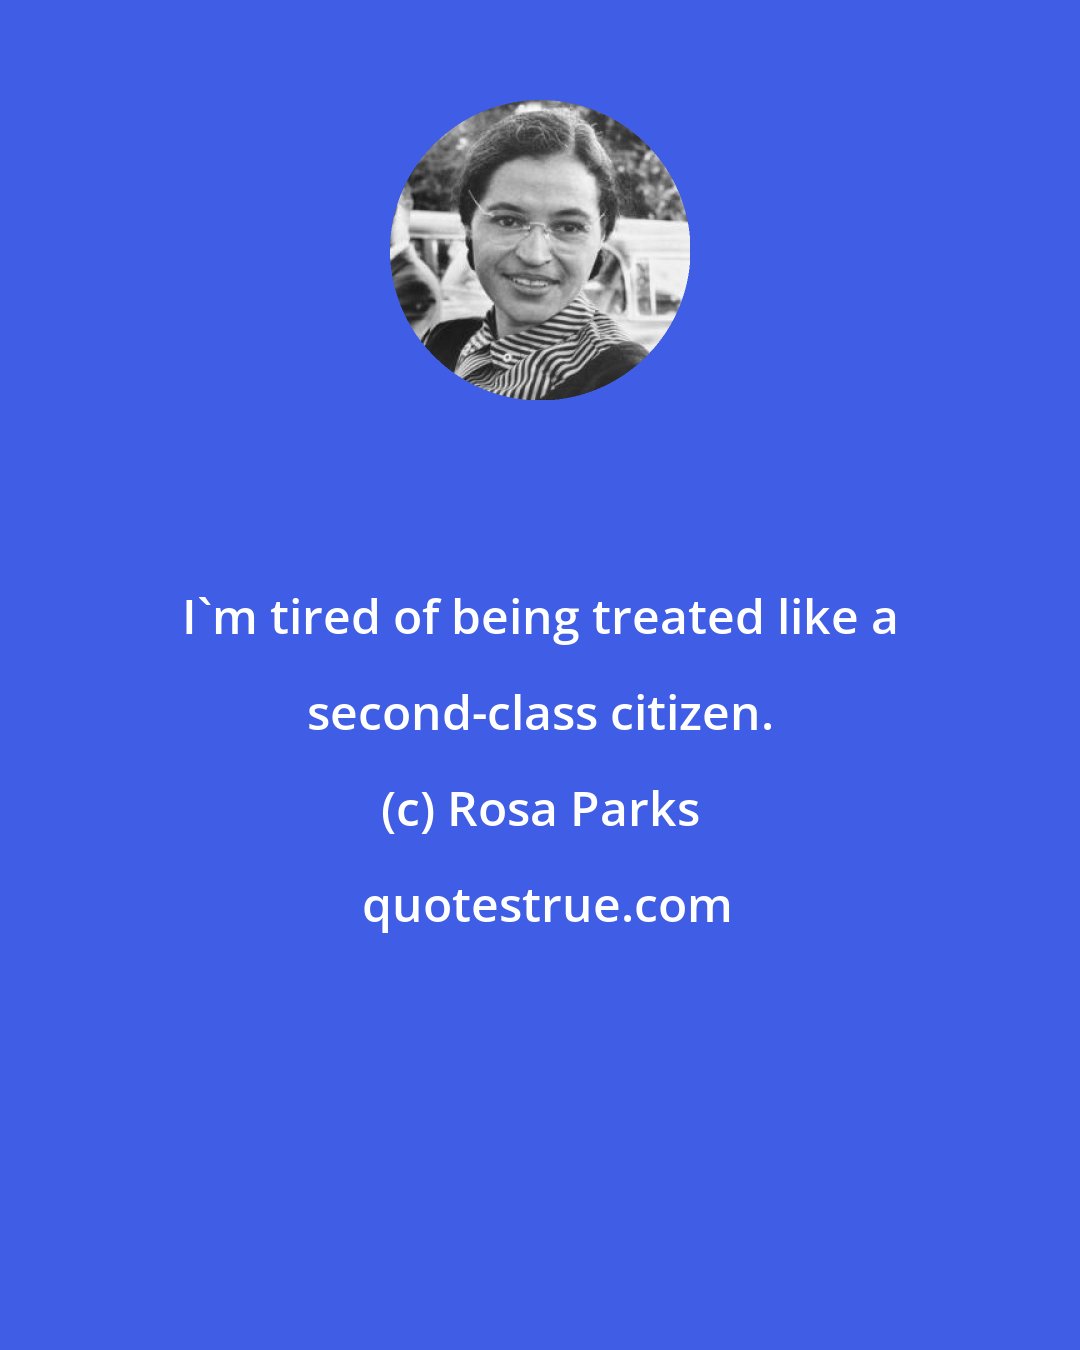 Rosa Parks: I'm tired of being treated like a second-class citizen.